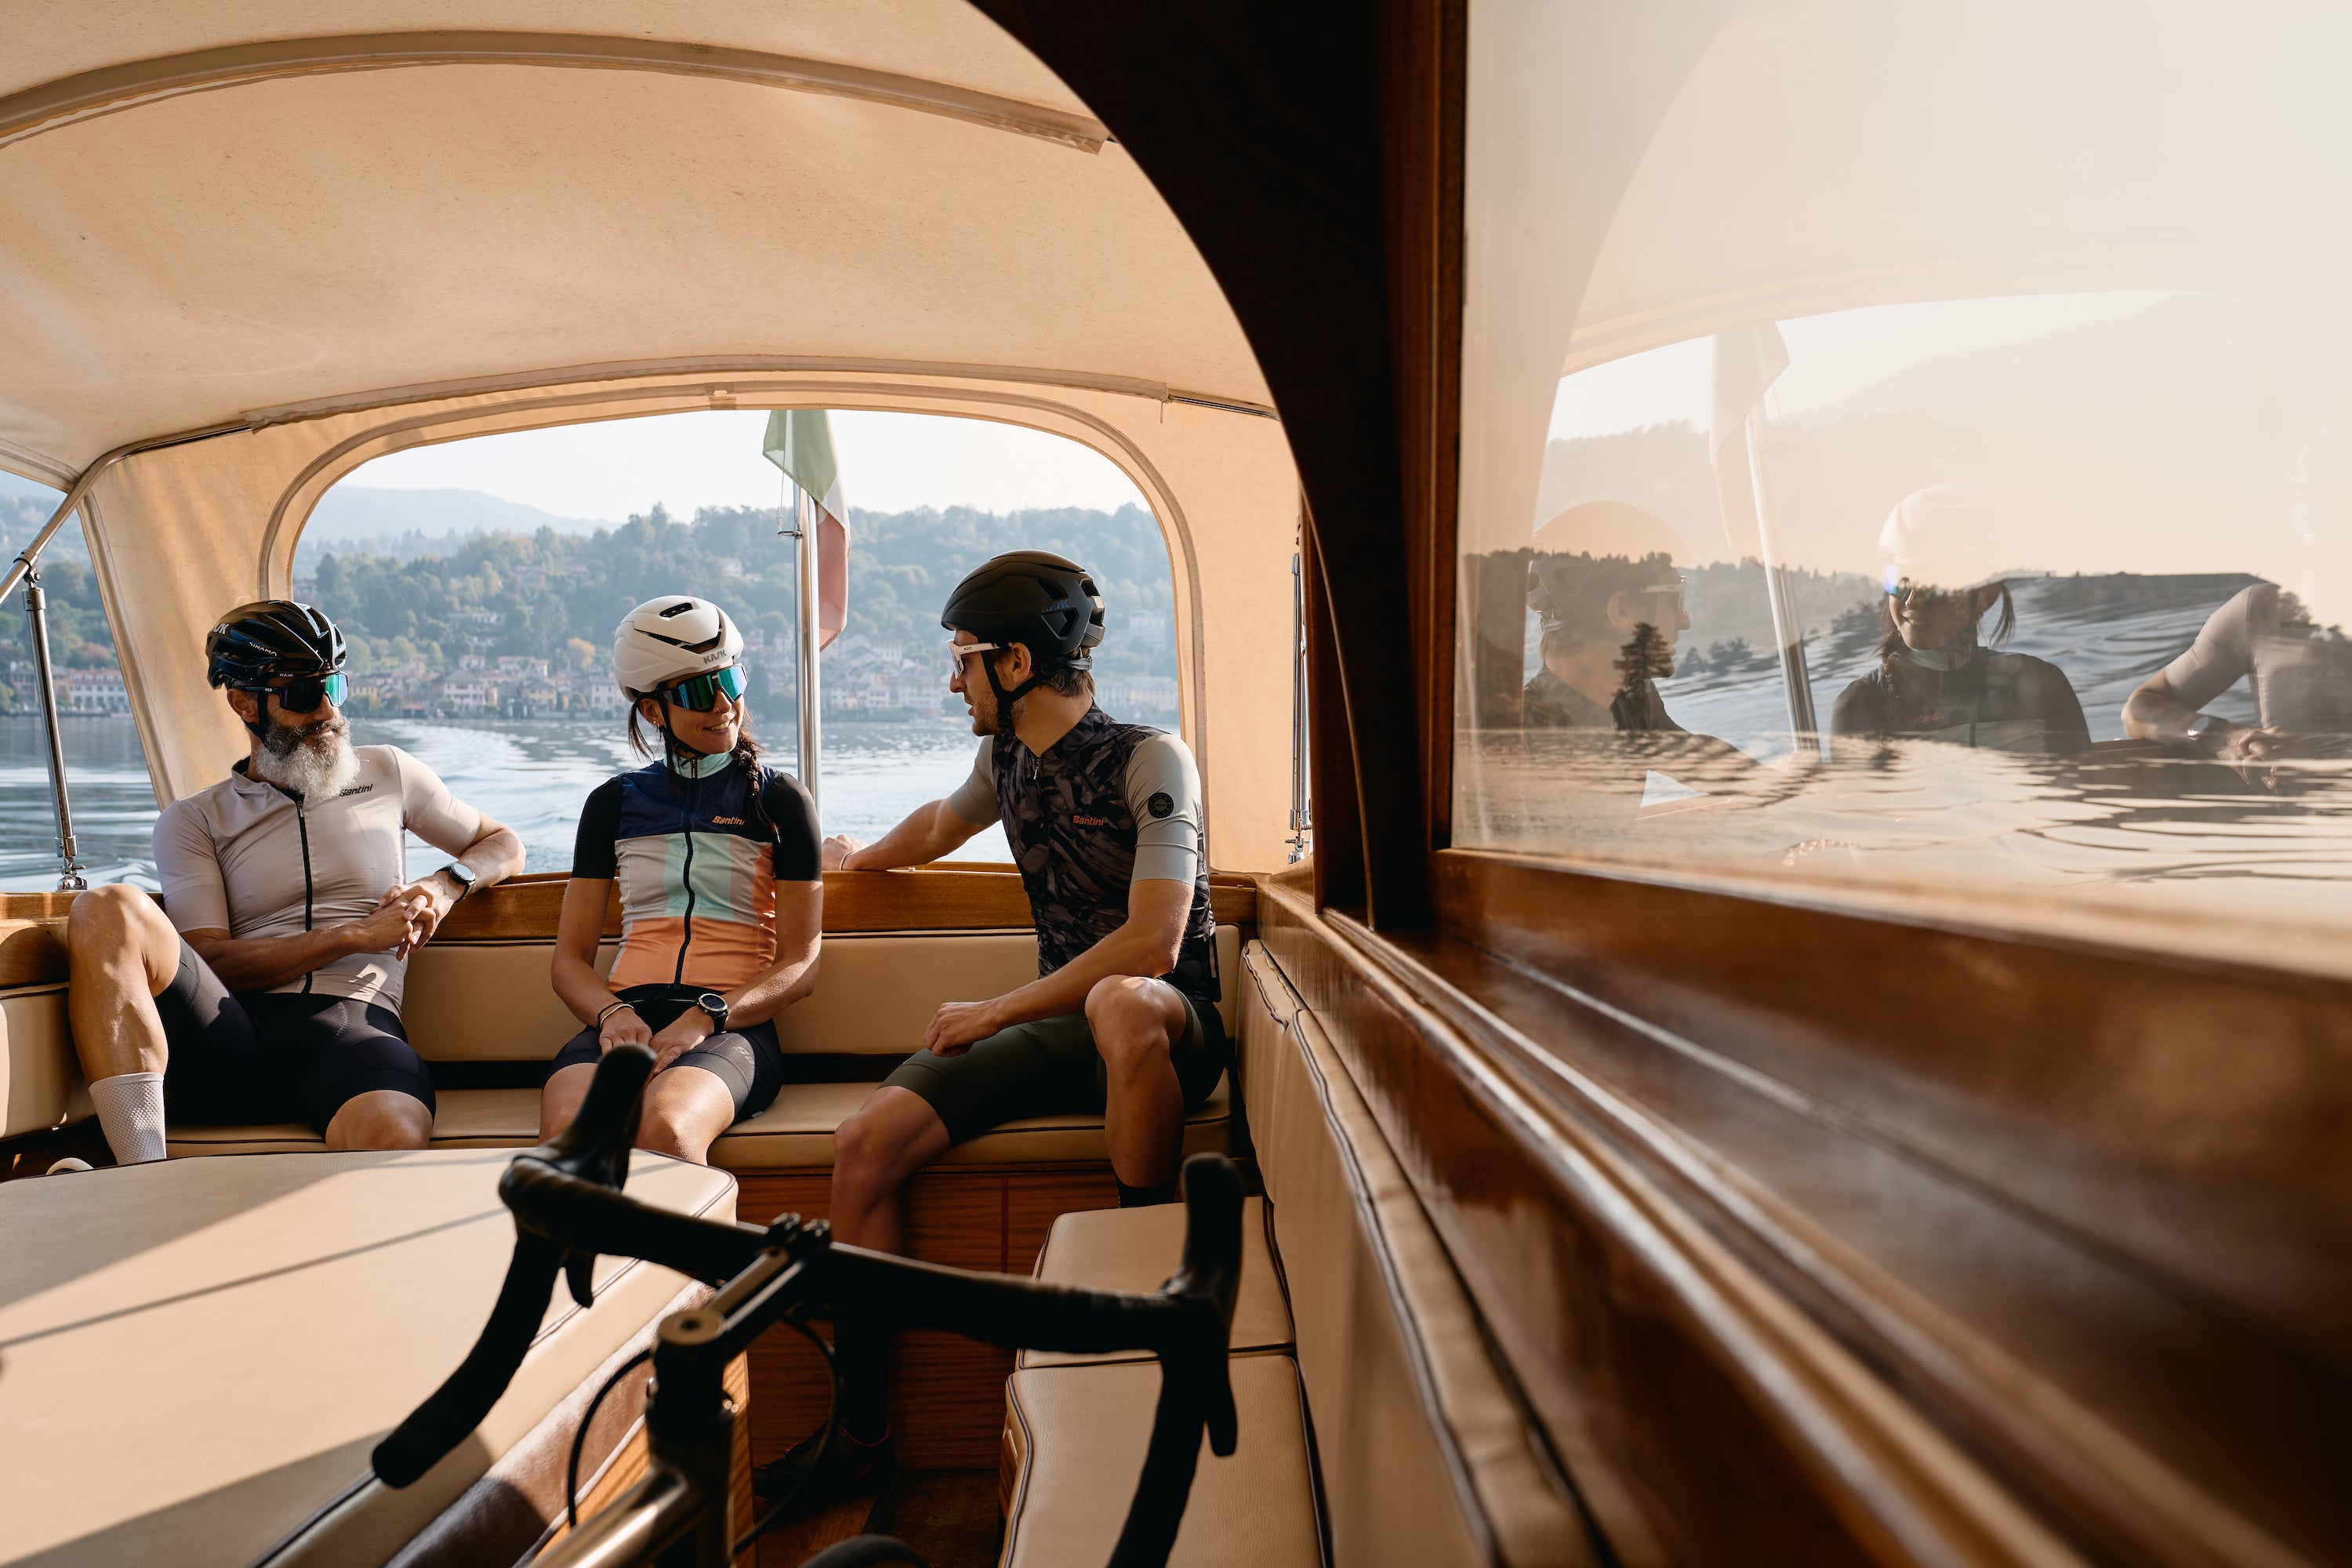 Three people in cycling kit on a boat